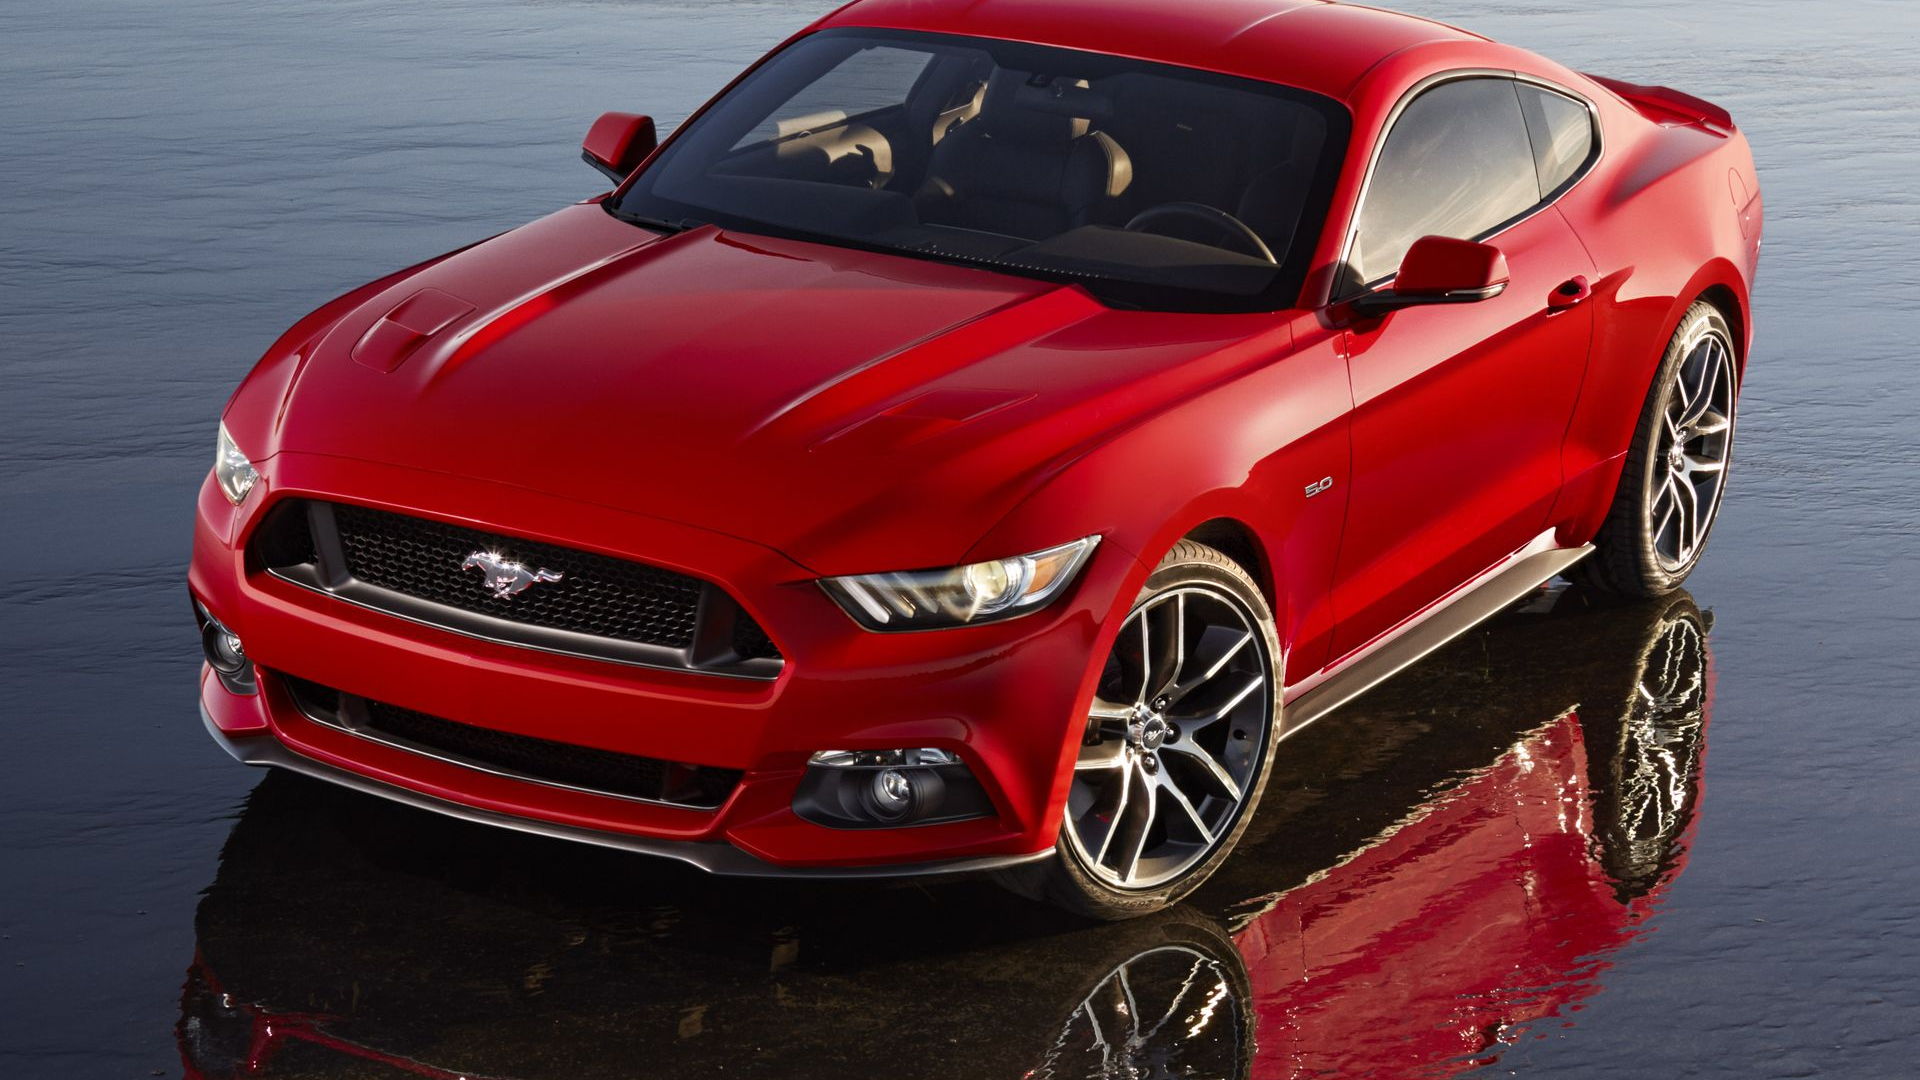 S650 Mustang chazcron weighs in... 7th gen 2023 Mustang S650 3D model & renderings in several colors! 2015-ford-mustang-via-usa-today-leak_100448537